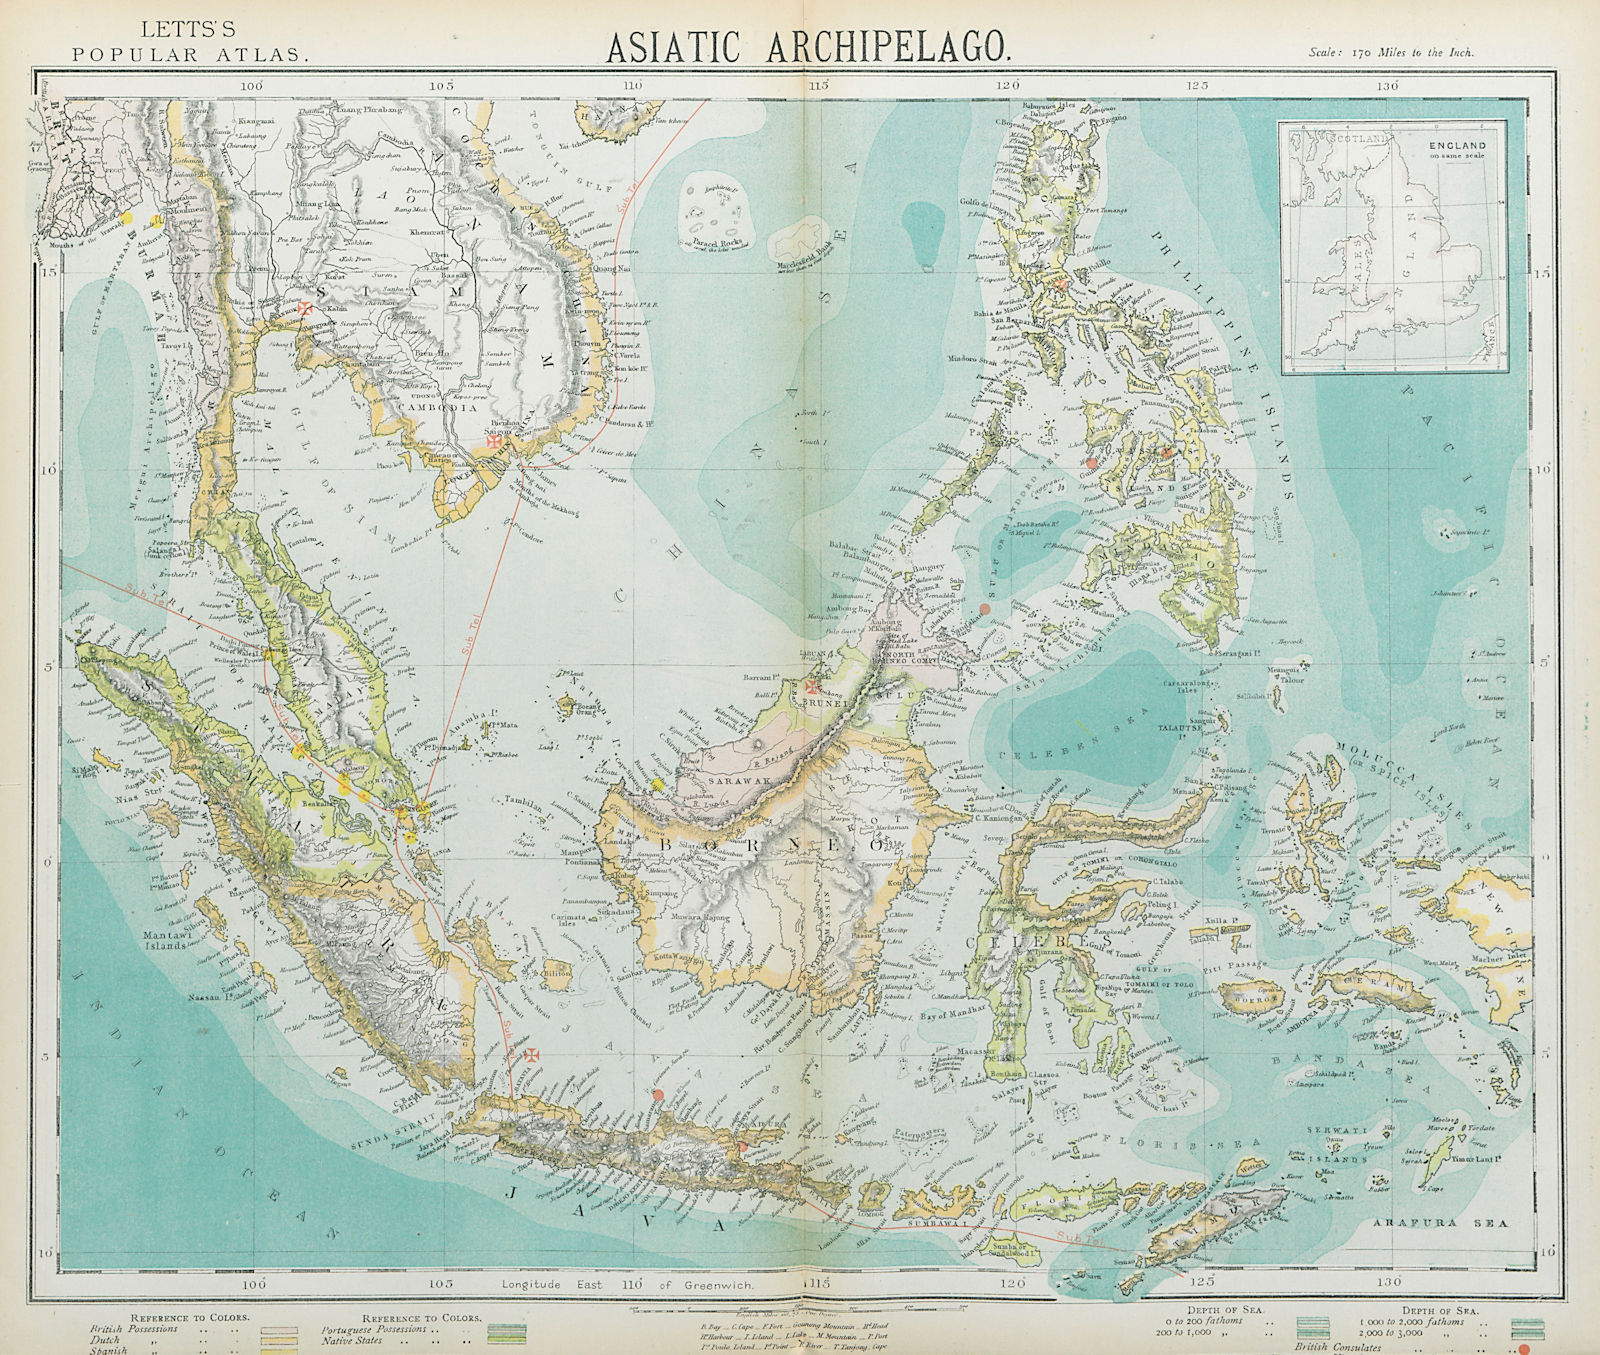 Associate Product Asiatic Archipelago. Dutch East Indies. Indochina Philippines. LETTS 1883 map